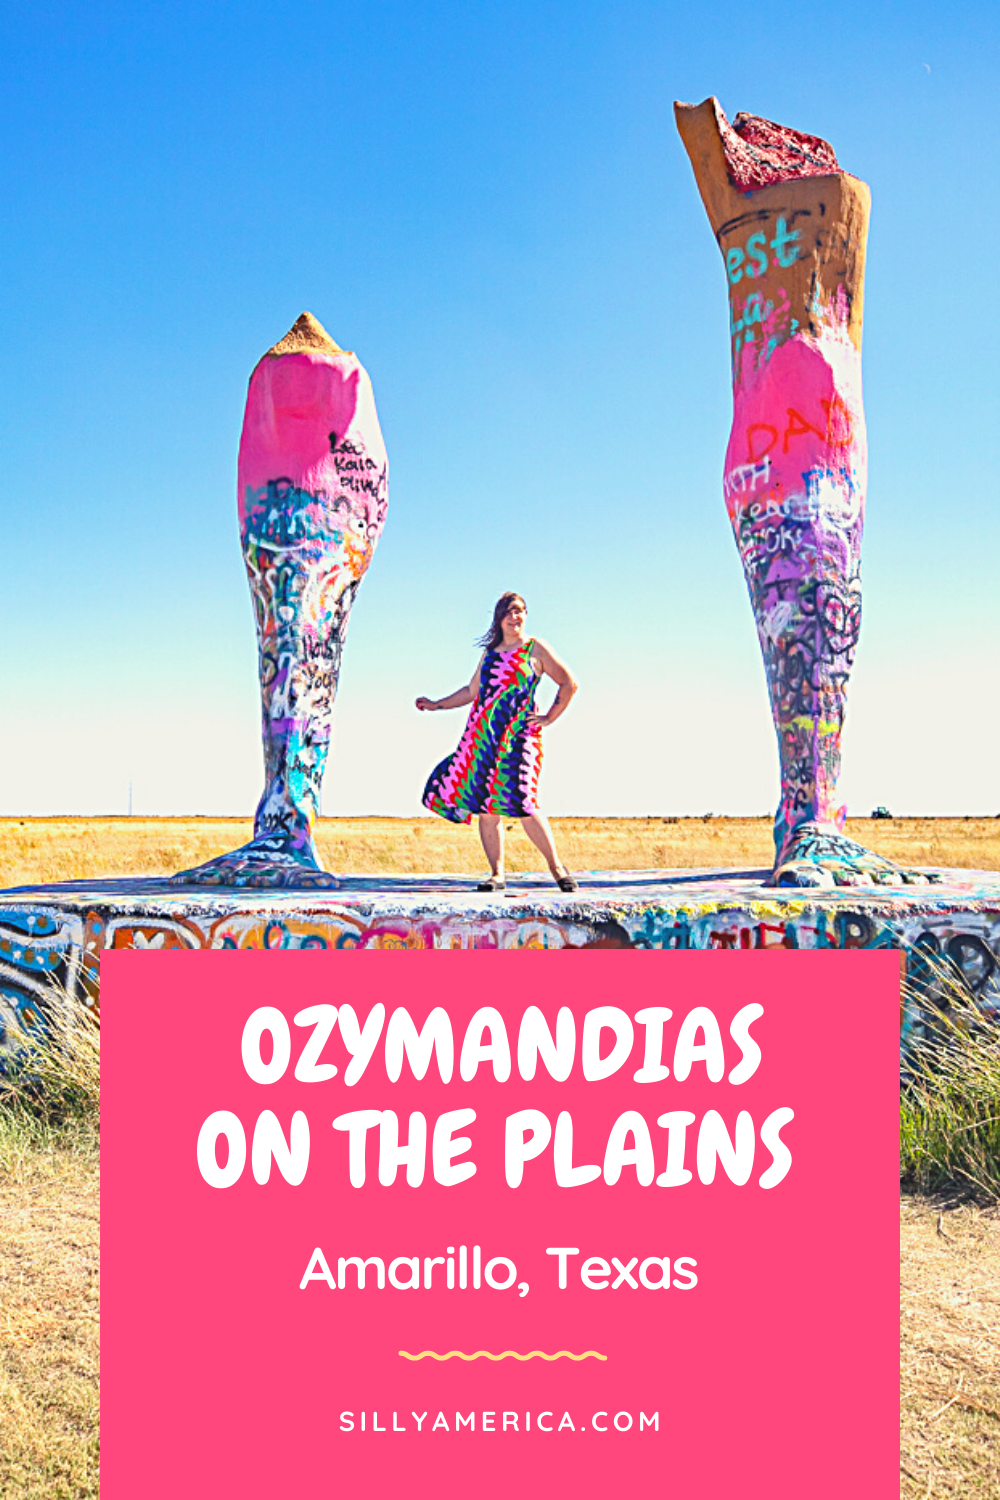 This roadside attraction has a leg up on all the others. Ozymandias on the Plains in Amarillo, Texas is a must see road trip attraction. Though you might just want to call it the Big Legs. Add weird roadside attraction to your travel itinerary and visit on a Route 66 road trip or Texas vacation.  #RoadTrips #RoadTripStop #Route66 #Route66RoadTrip #TexasRoute66 #Texas #TexasRoadTrip #TexasRoadsideAttractions #RoadsideAttractions #RoadsideAttraction #RoadsideAmerica #RoadTrip 